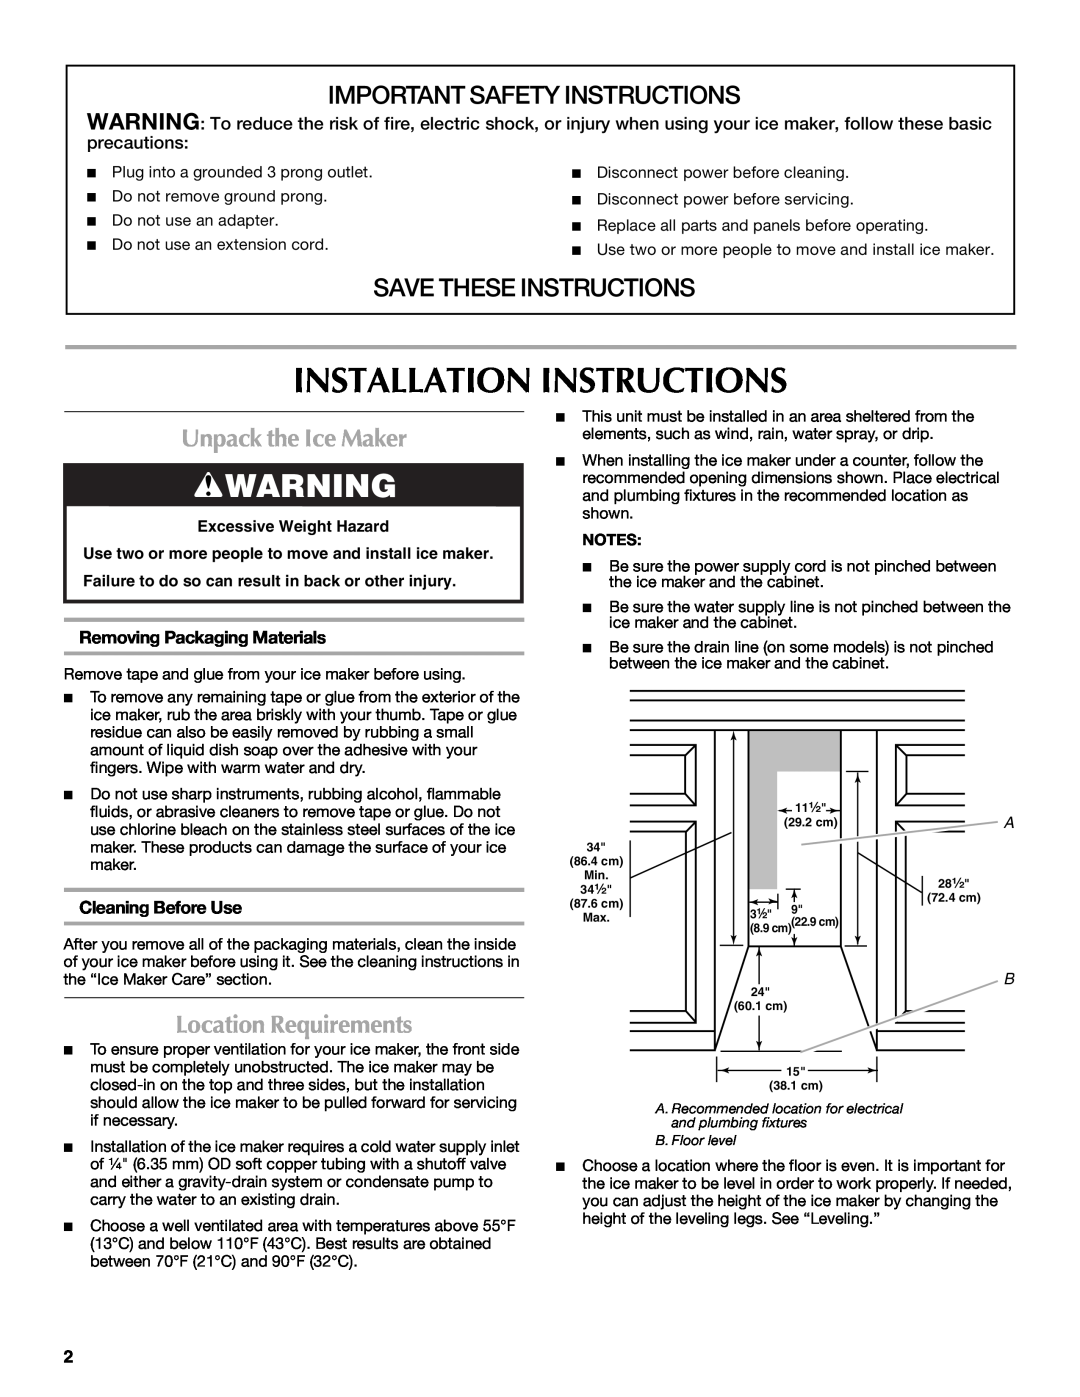 Maytag W10206488A Installation Instructions, Important Safety Instructions, Save These Instructions, Unpack the Ice Maker 